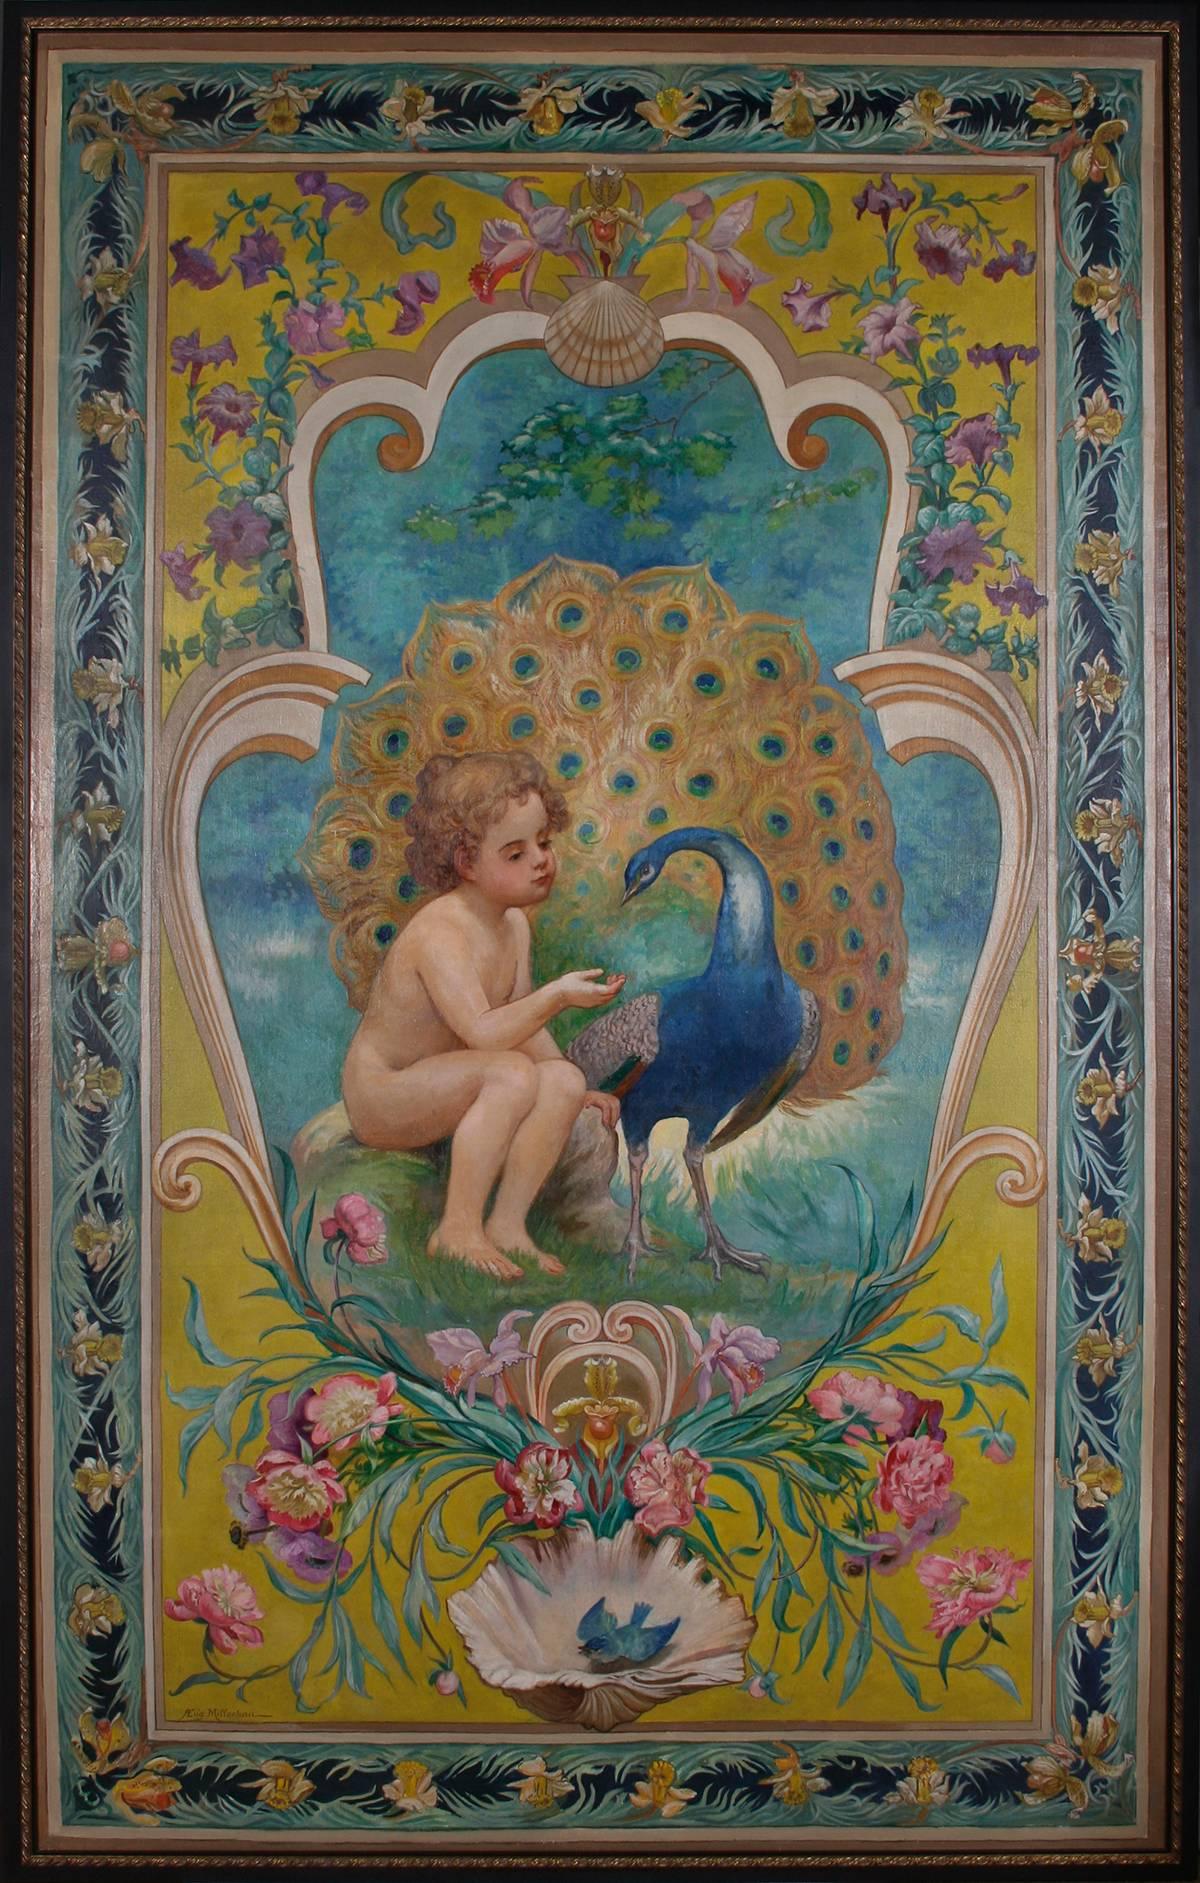 Large scale French turn of the century oil on canvas painting by Eugene Millochau, circa 1900. A brilliantly colored peacock with cherub is surrounded by a decorative floral border.